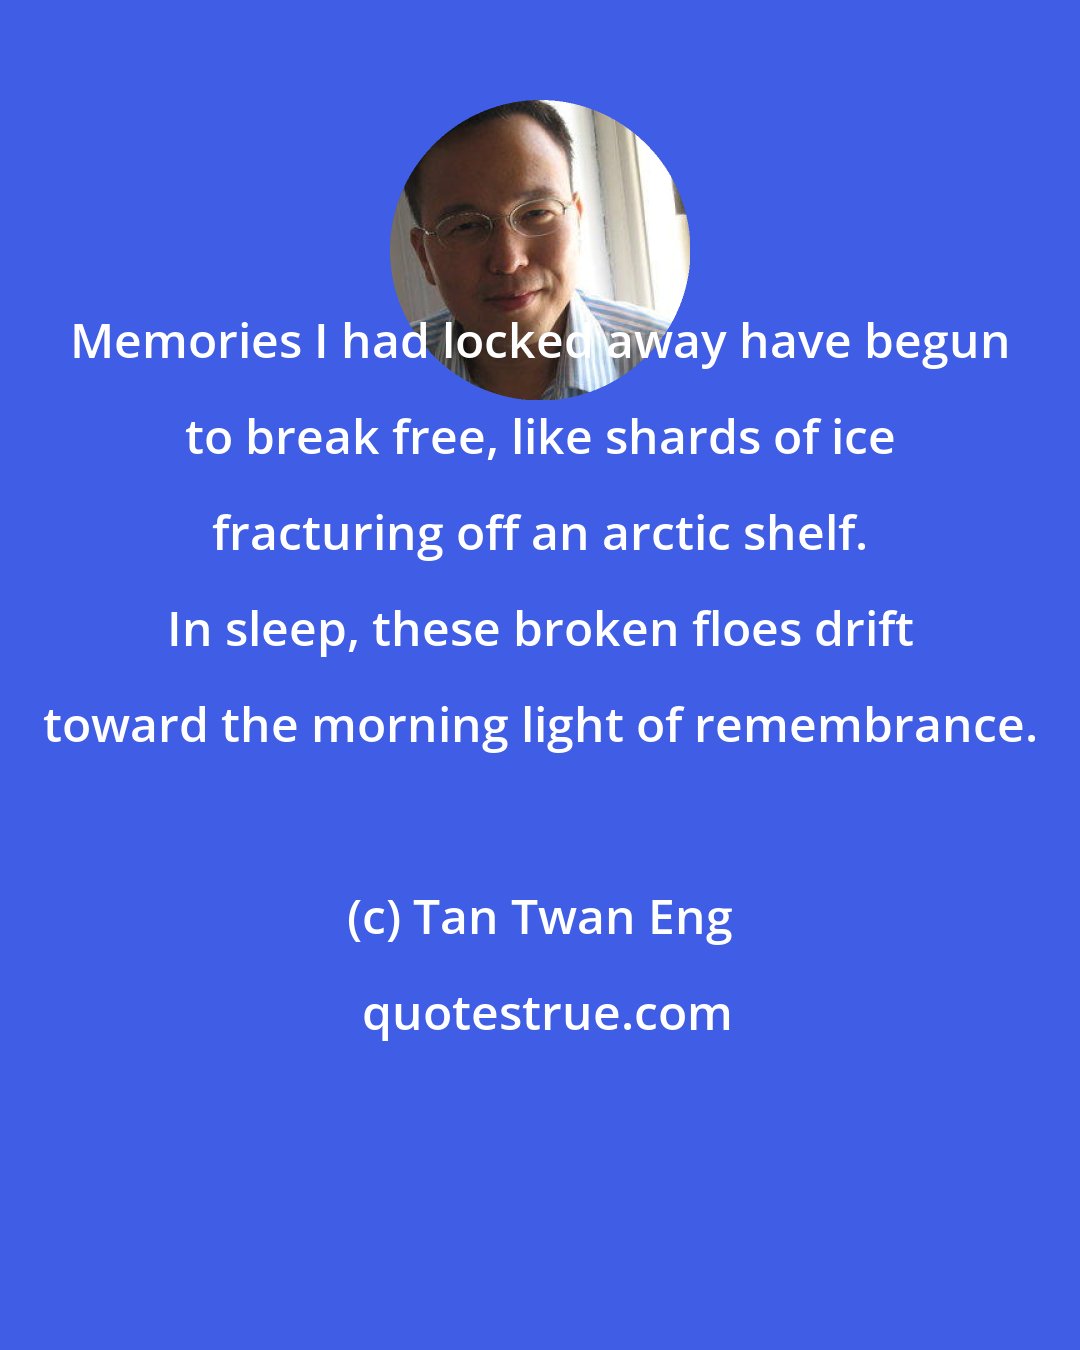 Tan Twan Eng: Memories I had locked away have begun to break free, like shards of ice fracturing off an arctic shelf. In sleep, these broken floes drift toward the morning light of remembrance.